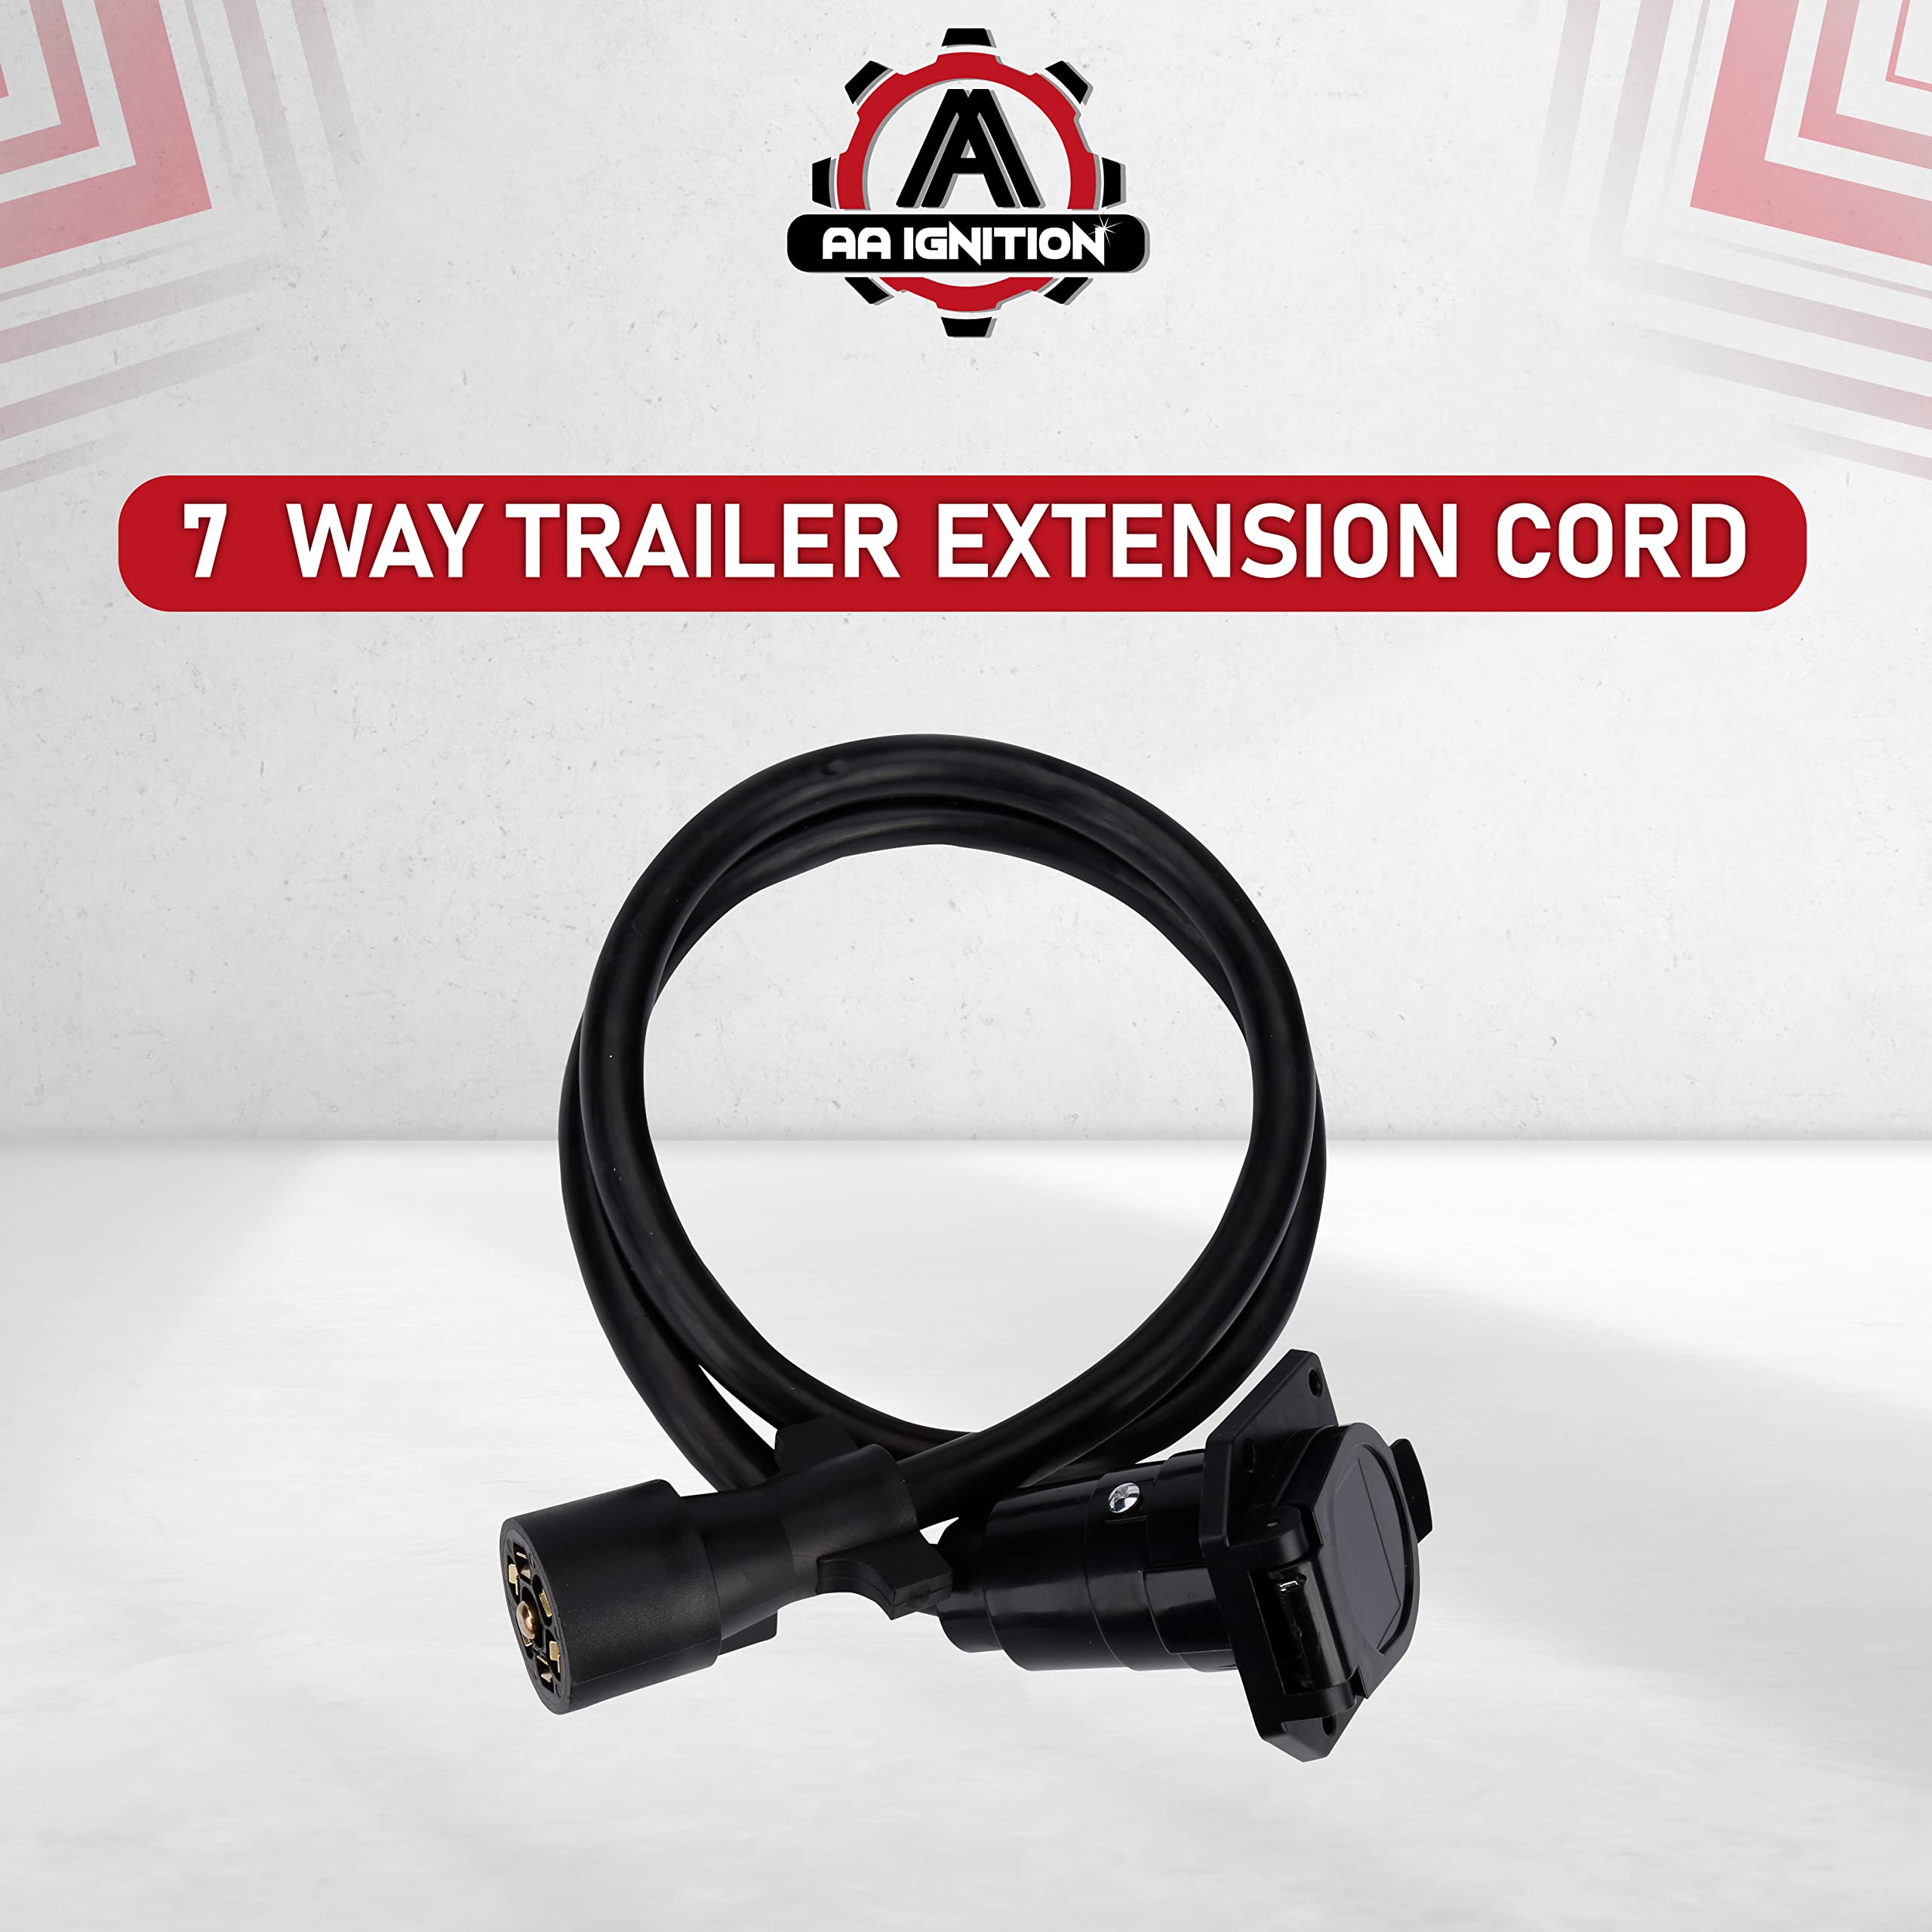 7 Way Trailer Extension Cord - 4 feet - Double Prongs Connector - Weatherproof - 7 Pin Wiring Connector Plug - Gooseneck Hitch Extender or 5th Wheel Trailer, RV, Caravan, Truck, Van - 10-14 AWG  - Like New